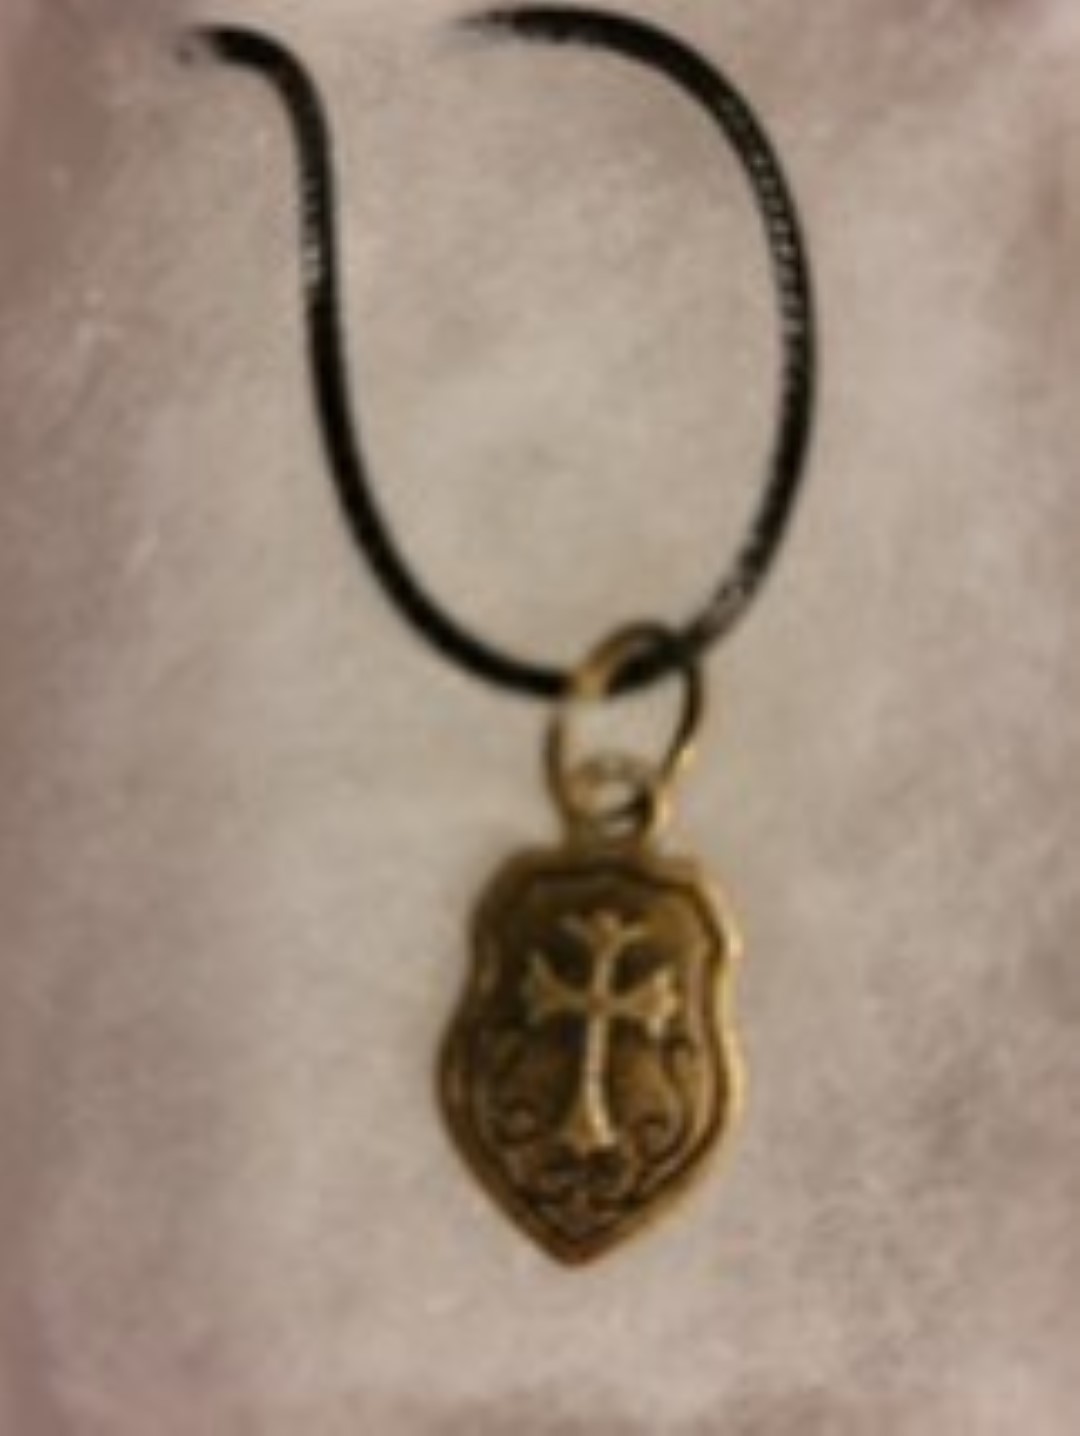 Christian cross and shield necklace     with magnetic clasp added    large 